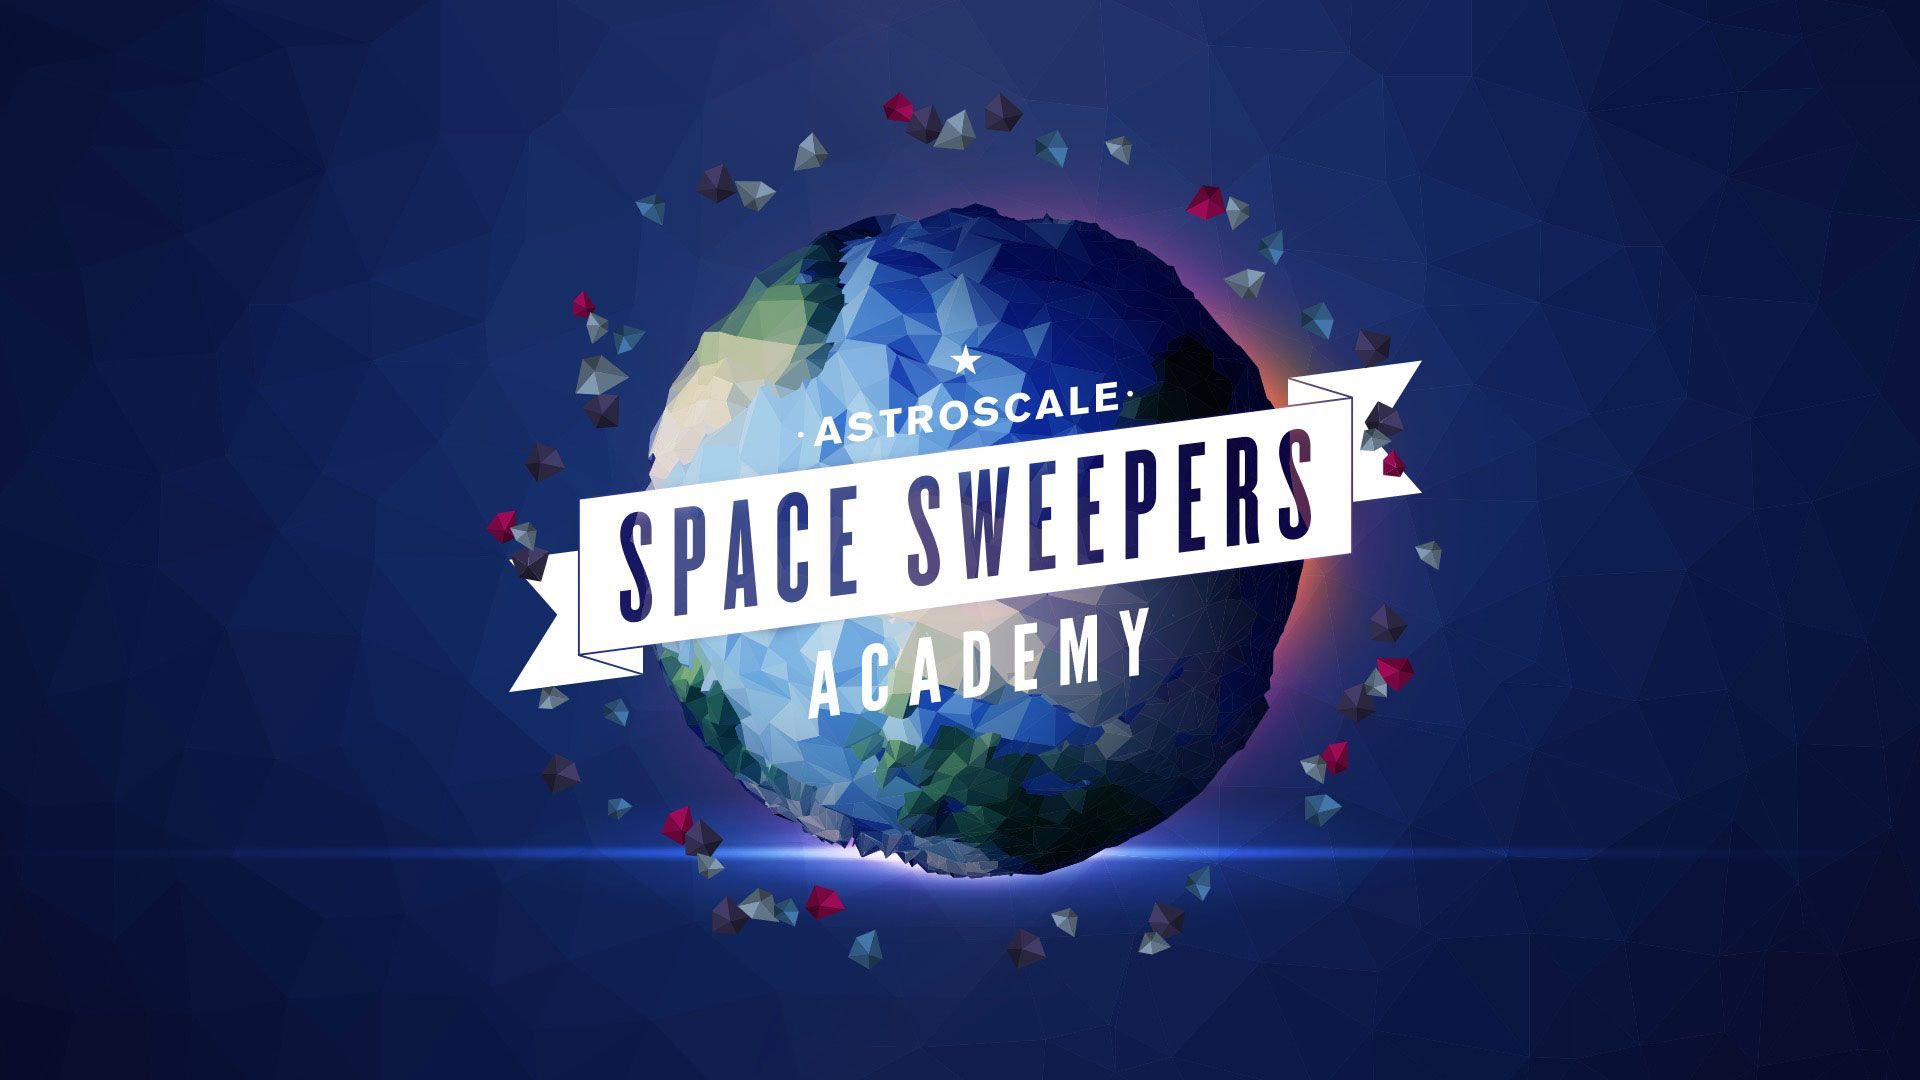 Case study: Astroscale Space Sweepers Academy